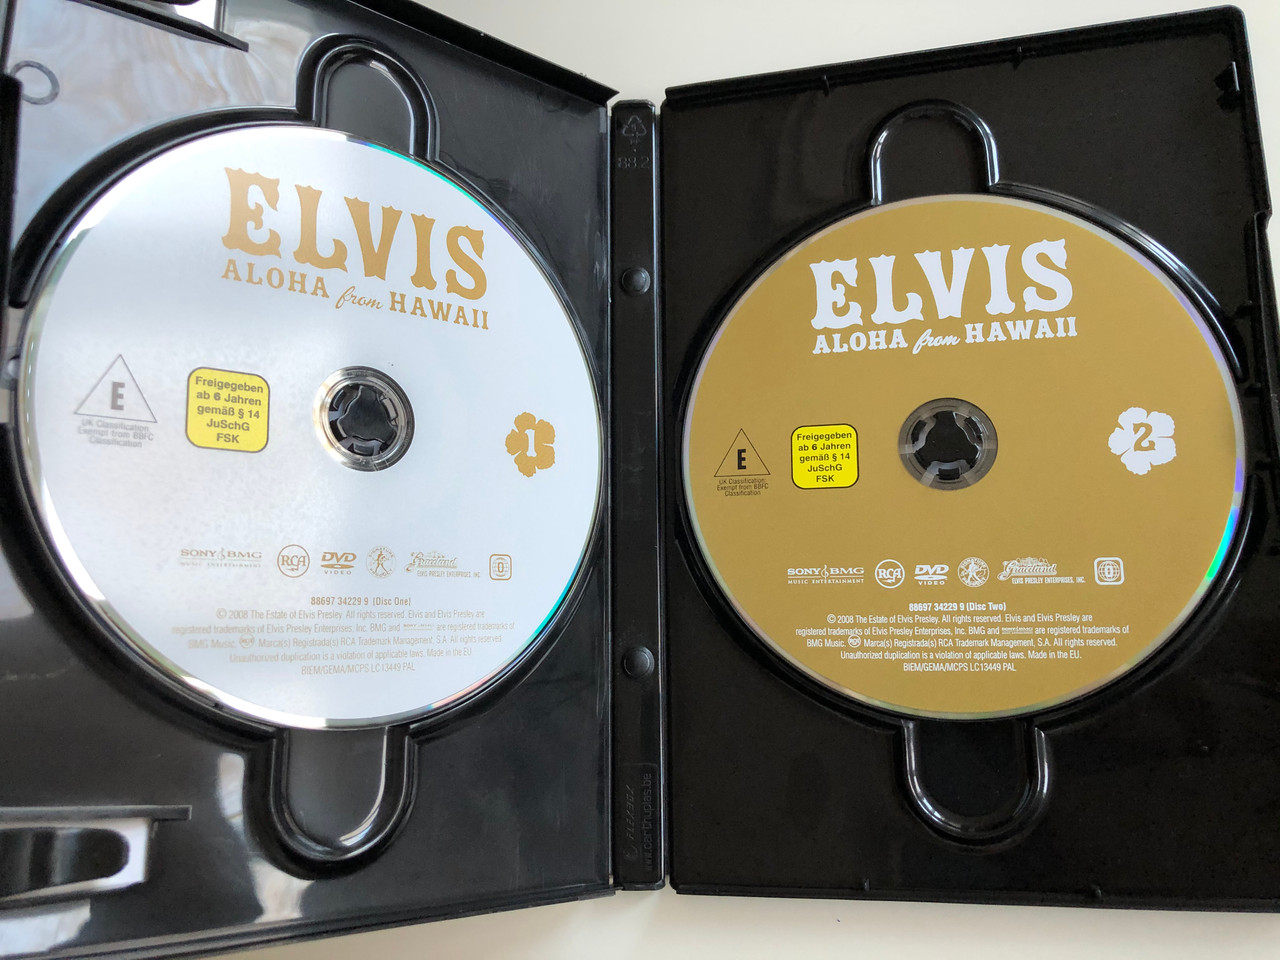 Elvis - Aloha from Hawaii 2 DVD deluxe edition 2004 / 2x DVD Set / BMG /  Over 4 hours of video / Elvis Presley previously unseen material - Bible in  My Language